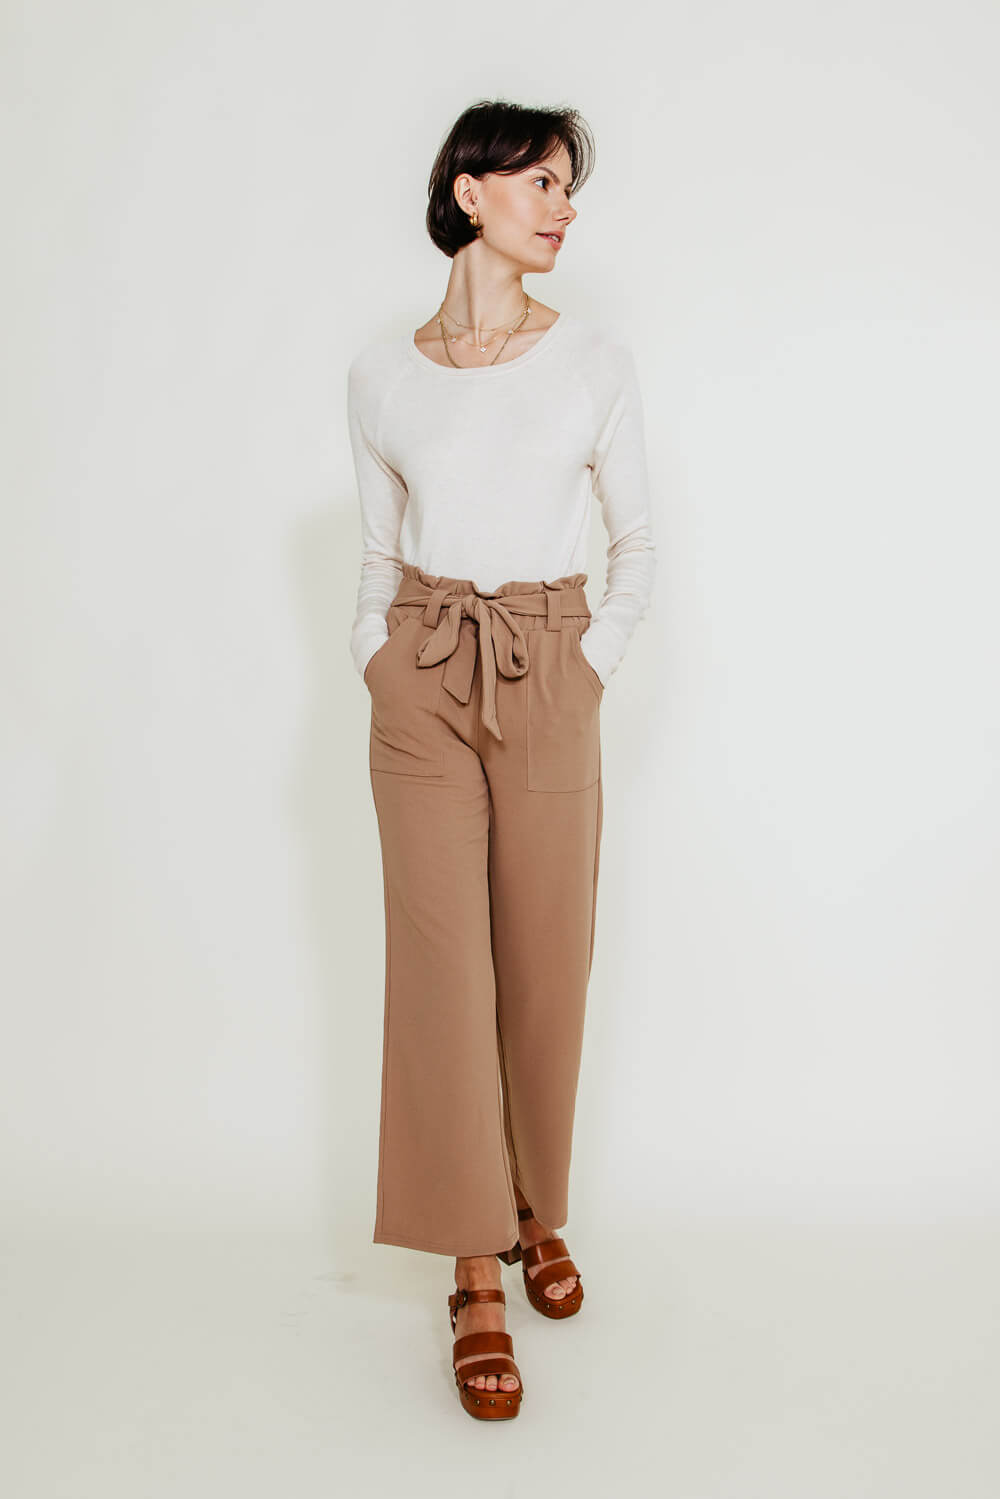 Allen Solly Woman Casual Trousers, for Women at Allensolly.com